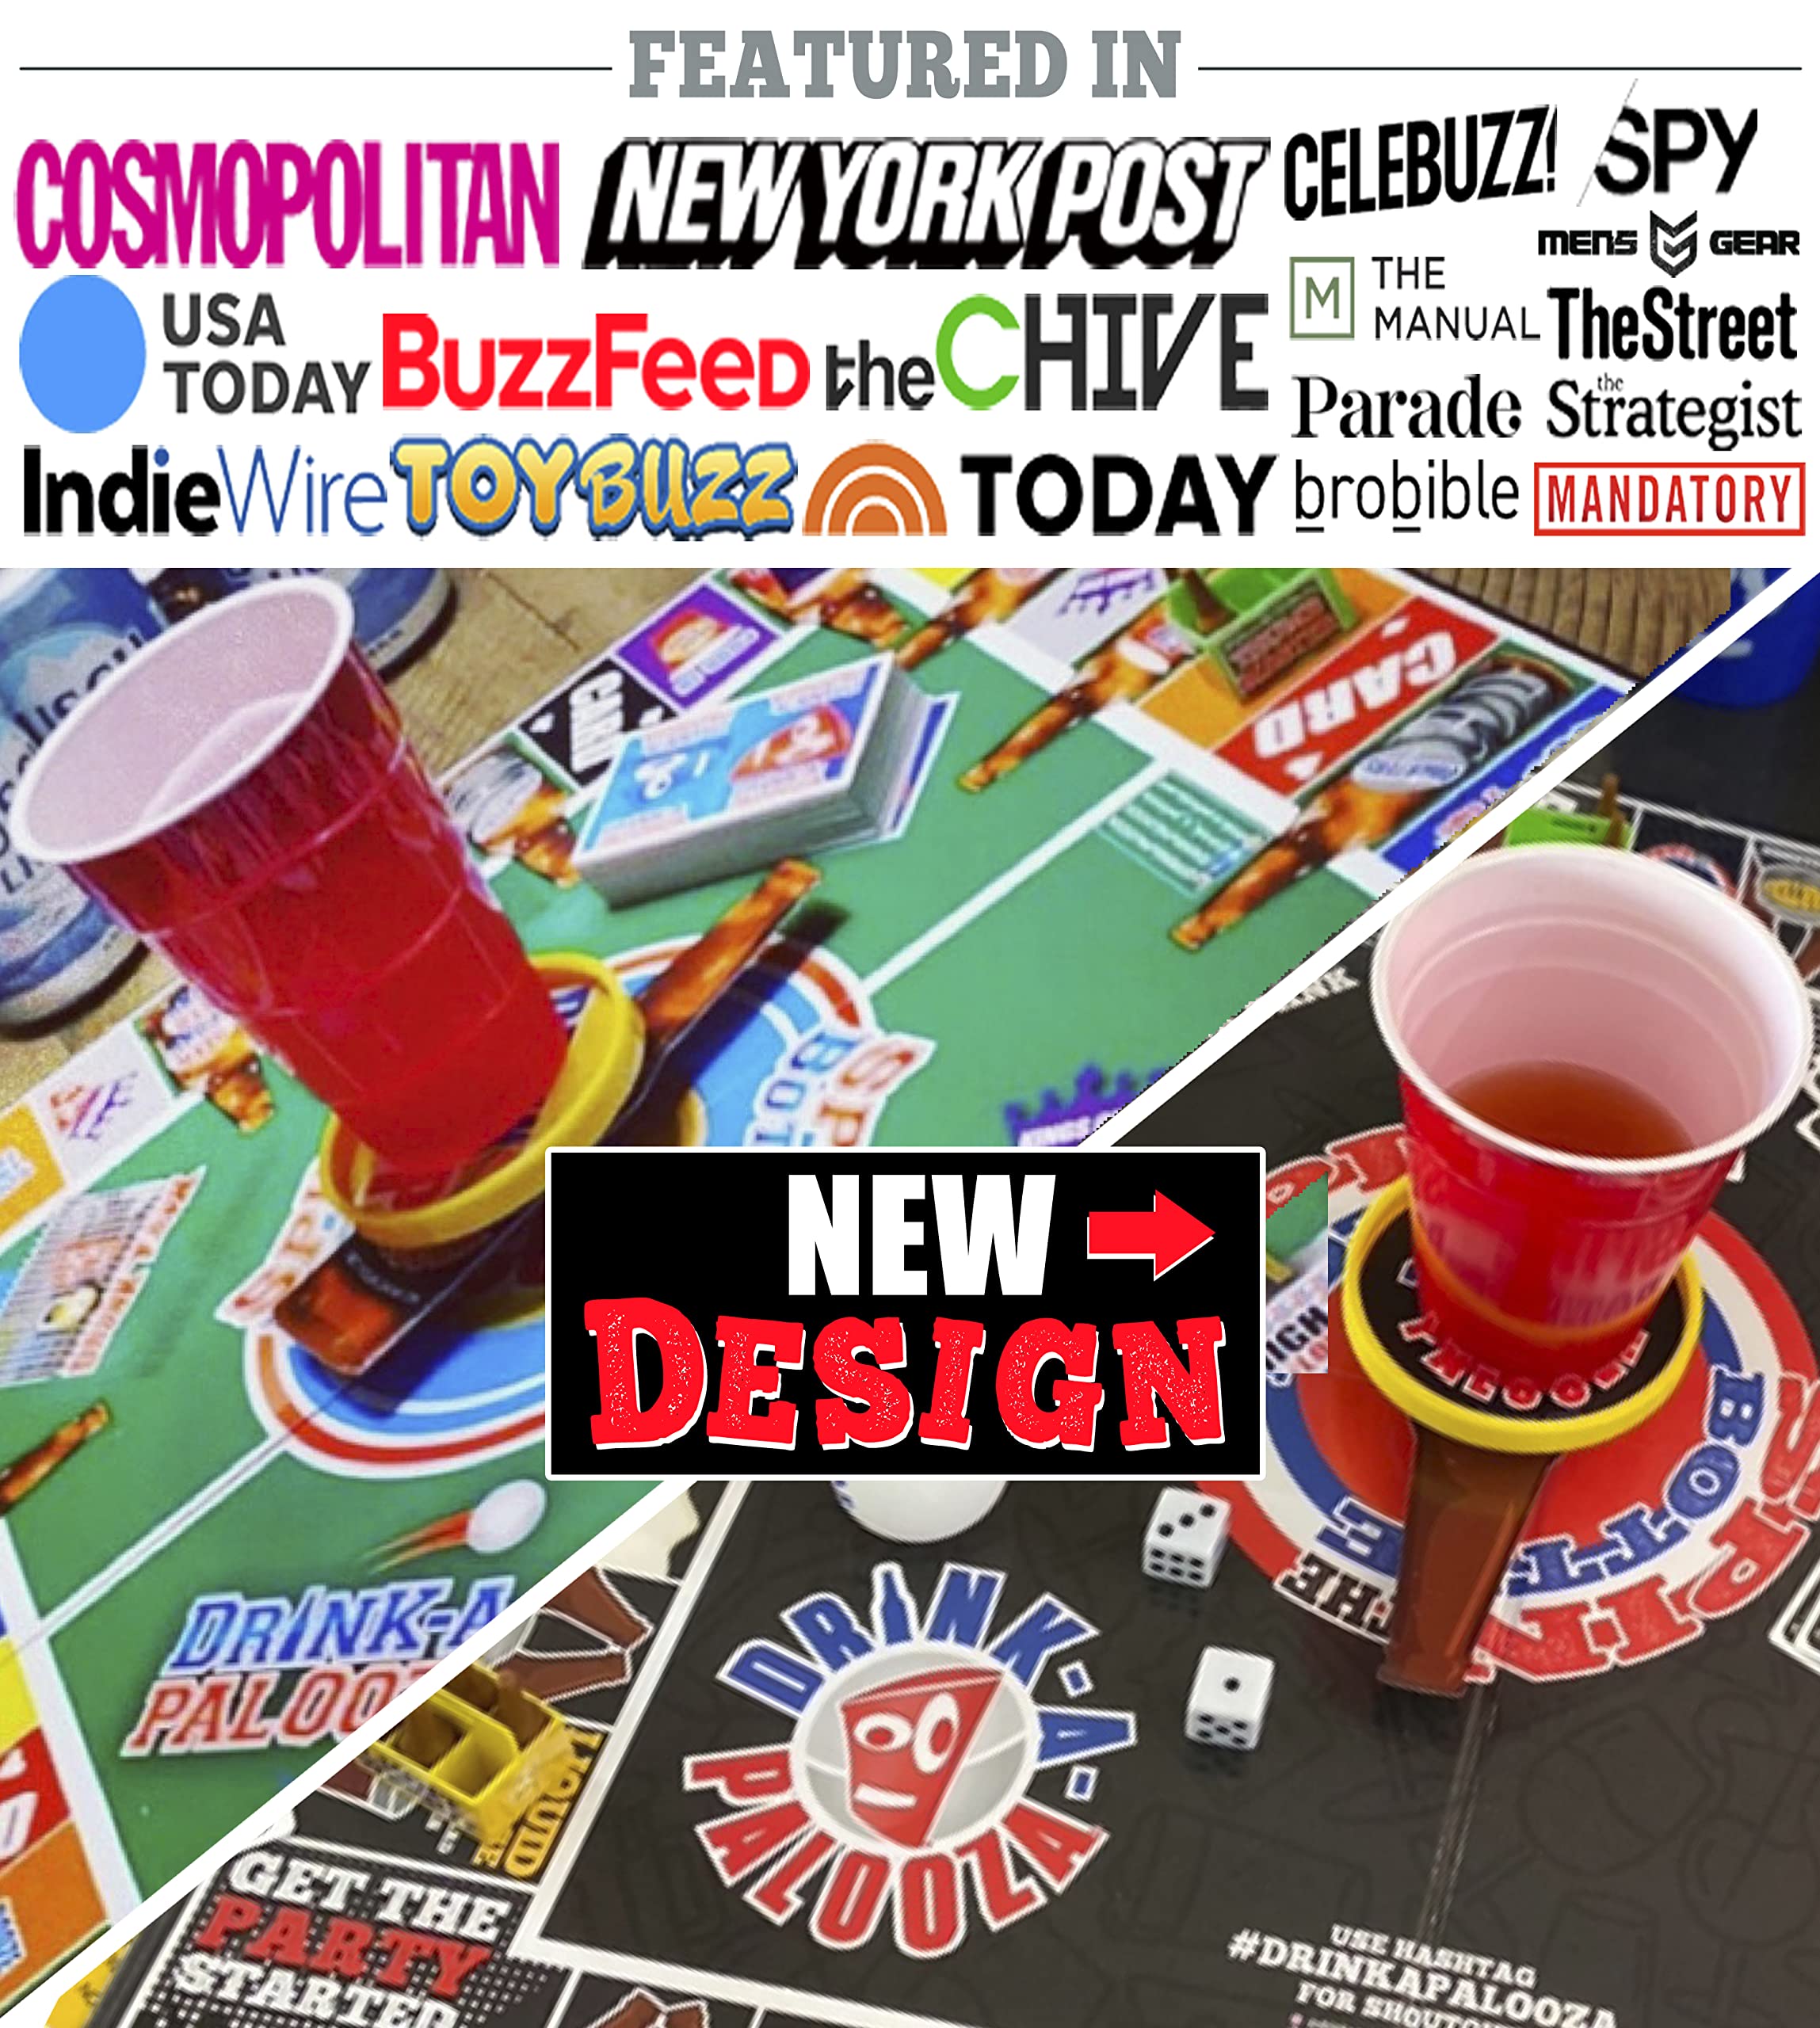 DRINK-A-PALOOZA Board Game: Fun Drinking Games for Couples Game Night | The Drinking Board Game for Parties That Combines Beer Pong + Flip Cup + Kings Cup Card Game and All The Best Drinking Games